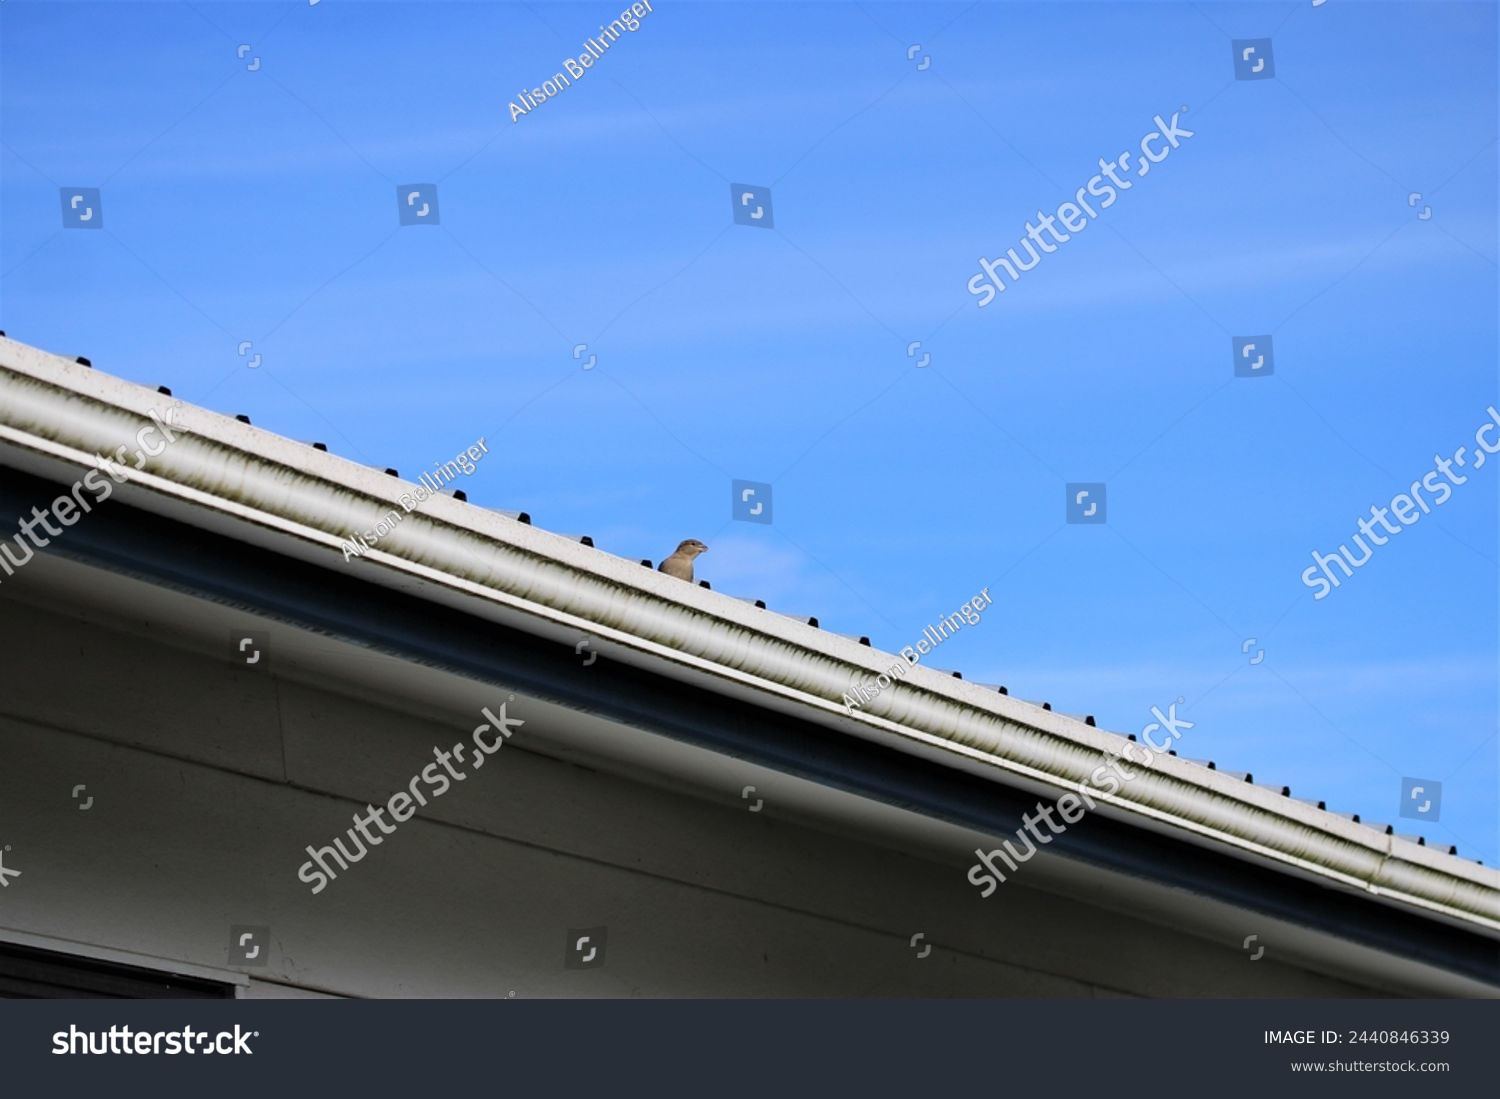 Silhouette of a sparrow on a house roof #2440846339